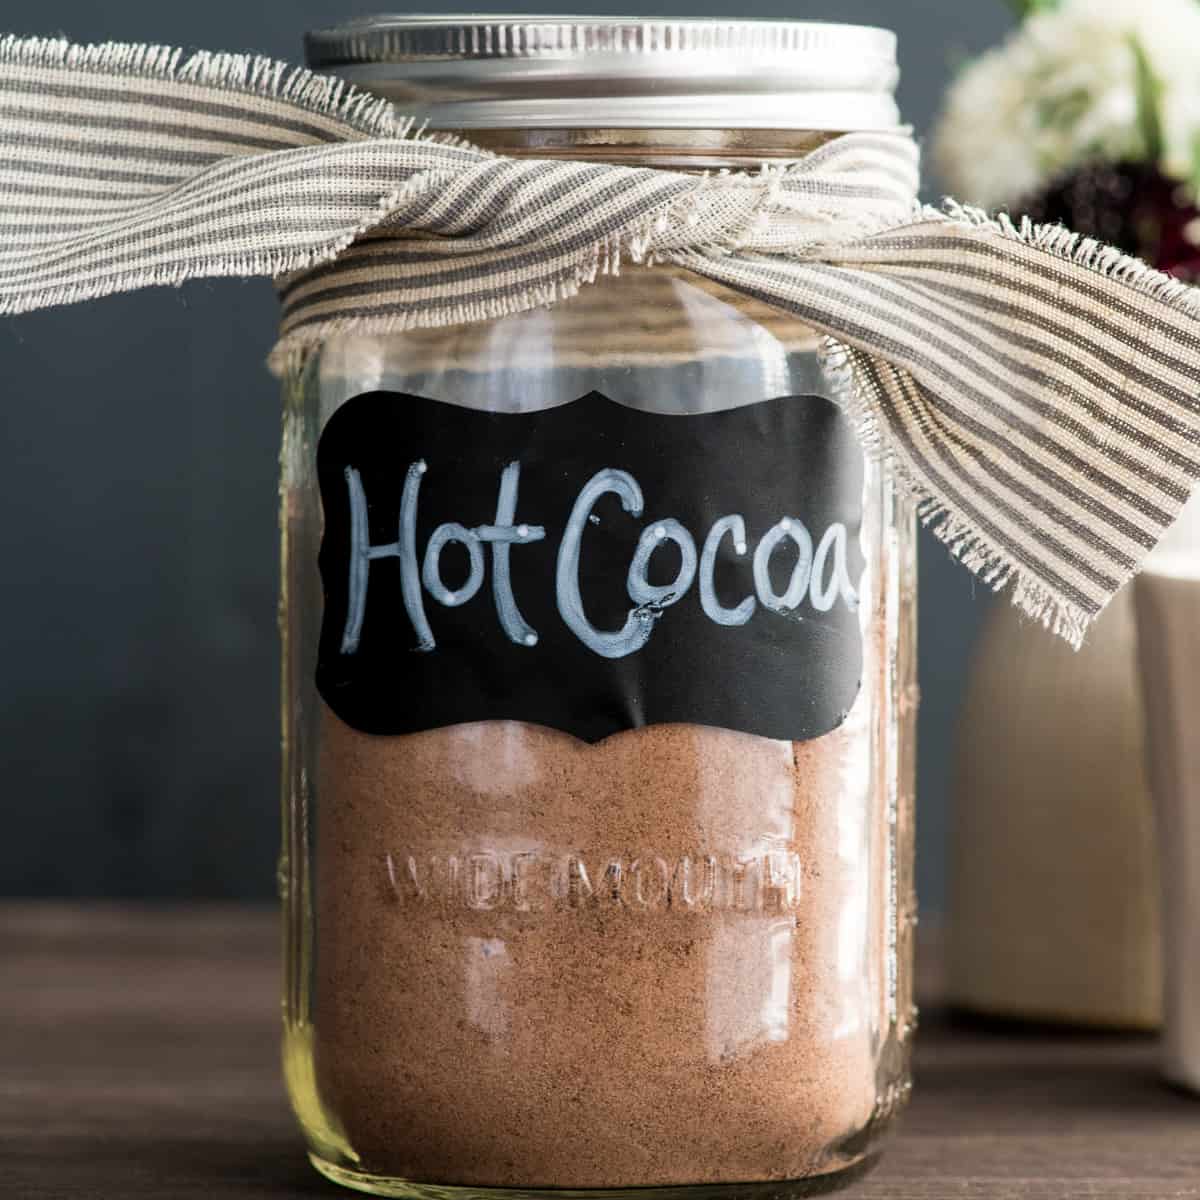 a glass jar labeled "hot cocoa" containing Dairy-Free Hot Chocolate Mix